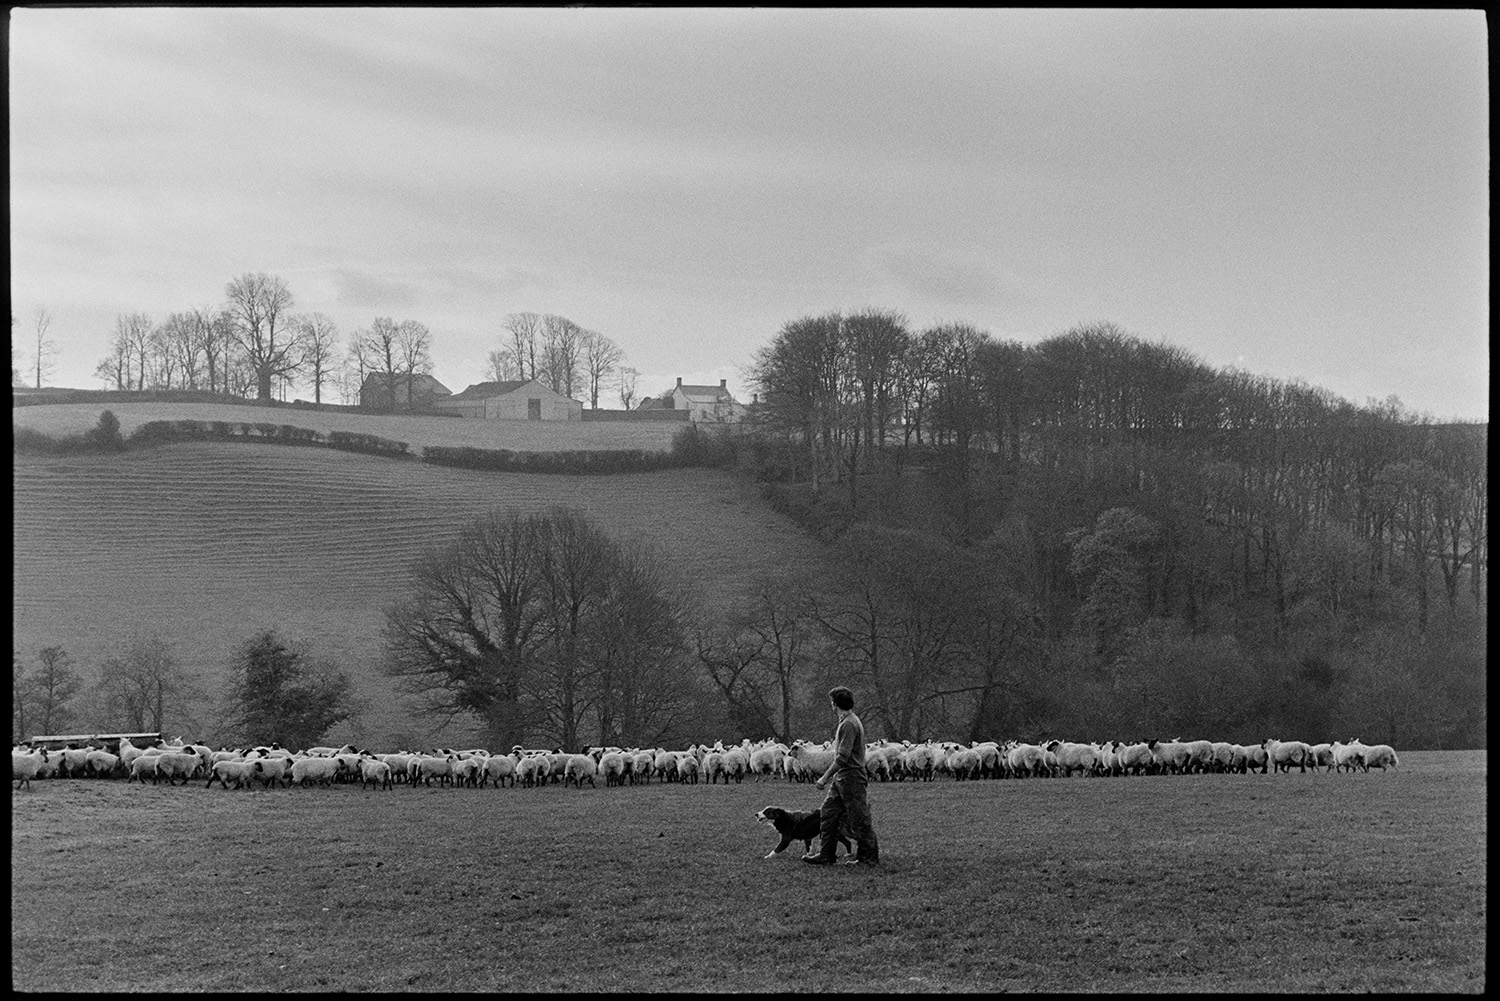 Farmer feeding, checking sheep, filling hayrack. 
[Graham Ward walking through a field with a dog at Parsonage, Iddesleigh. They are watching a flock of sheep eating from a hayrack. Trees, fields and farm buildings are visible in the background.]